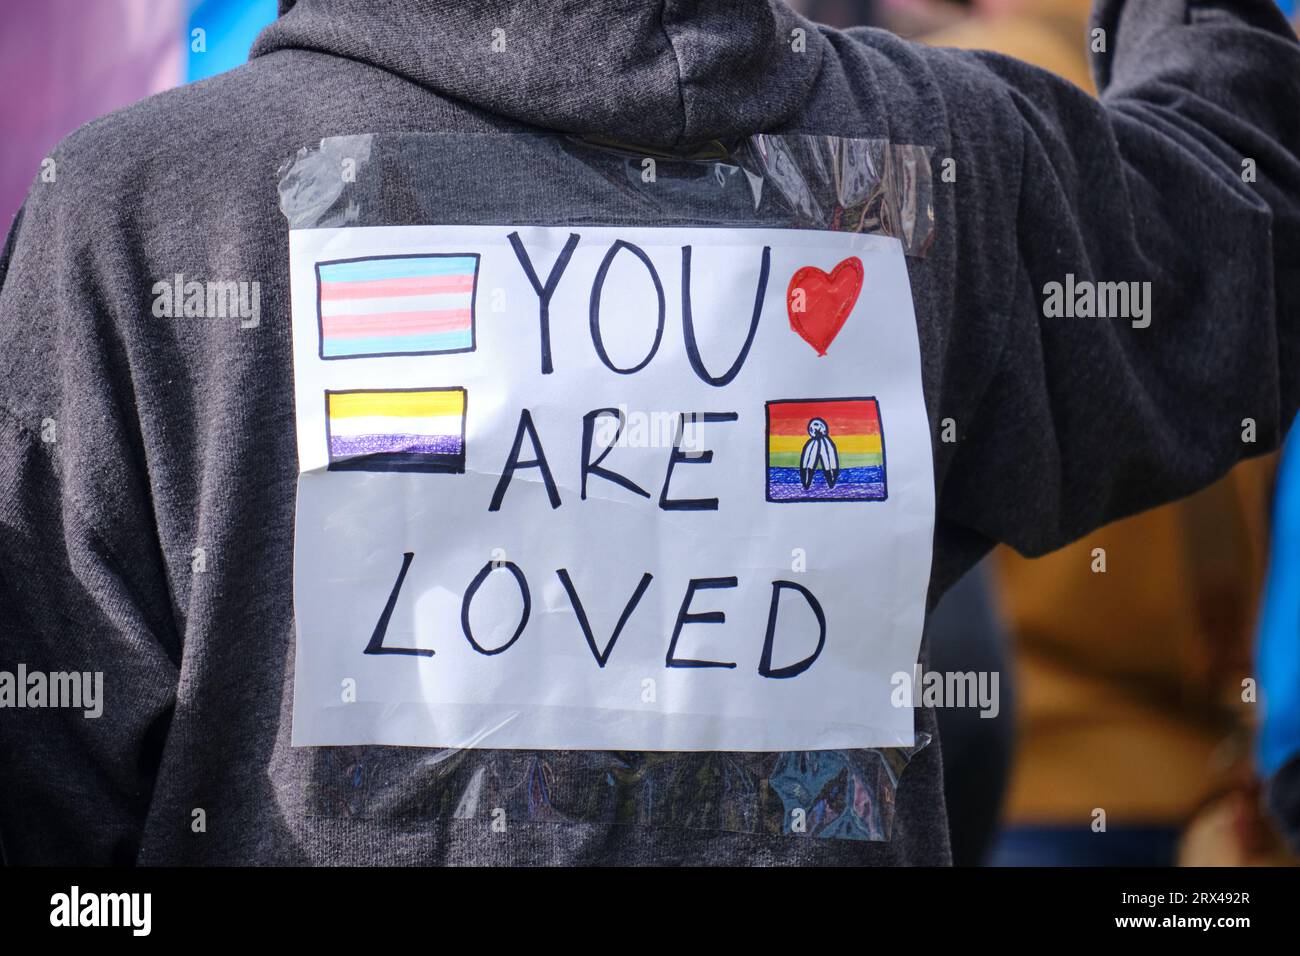 hand drawn sign: 'You are loved' on back of by Pro LGBTQ+ counter protester at anti-trans rally Stock Photo